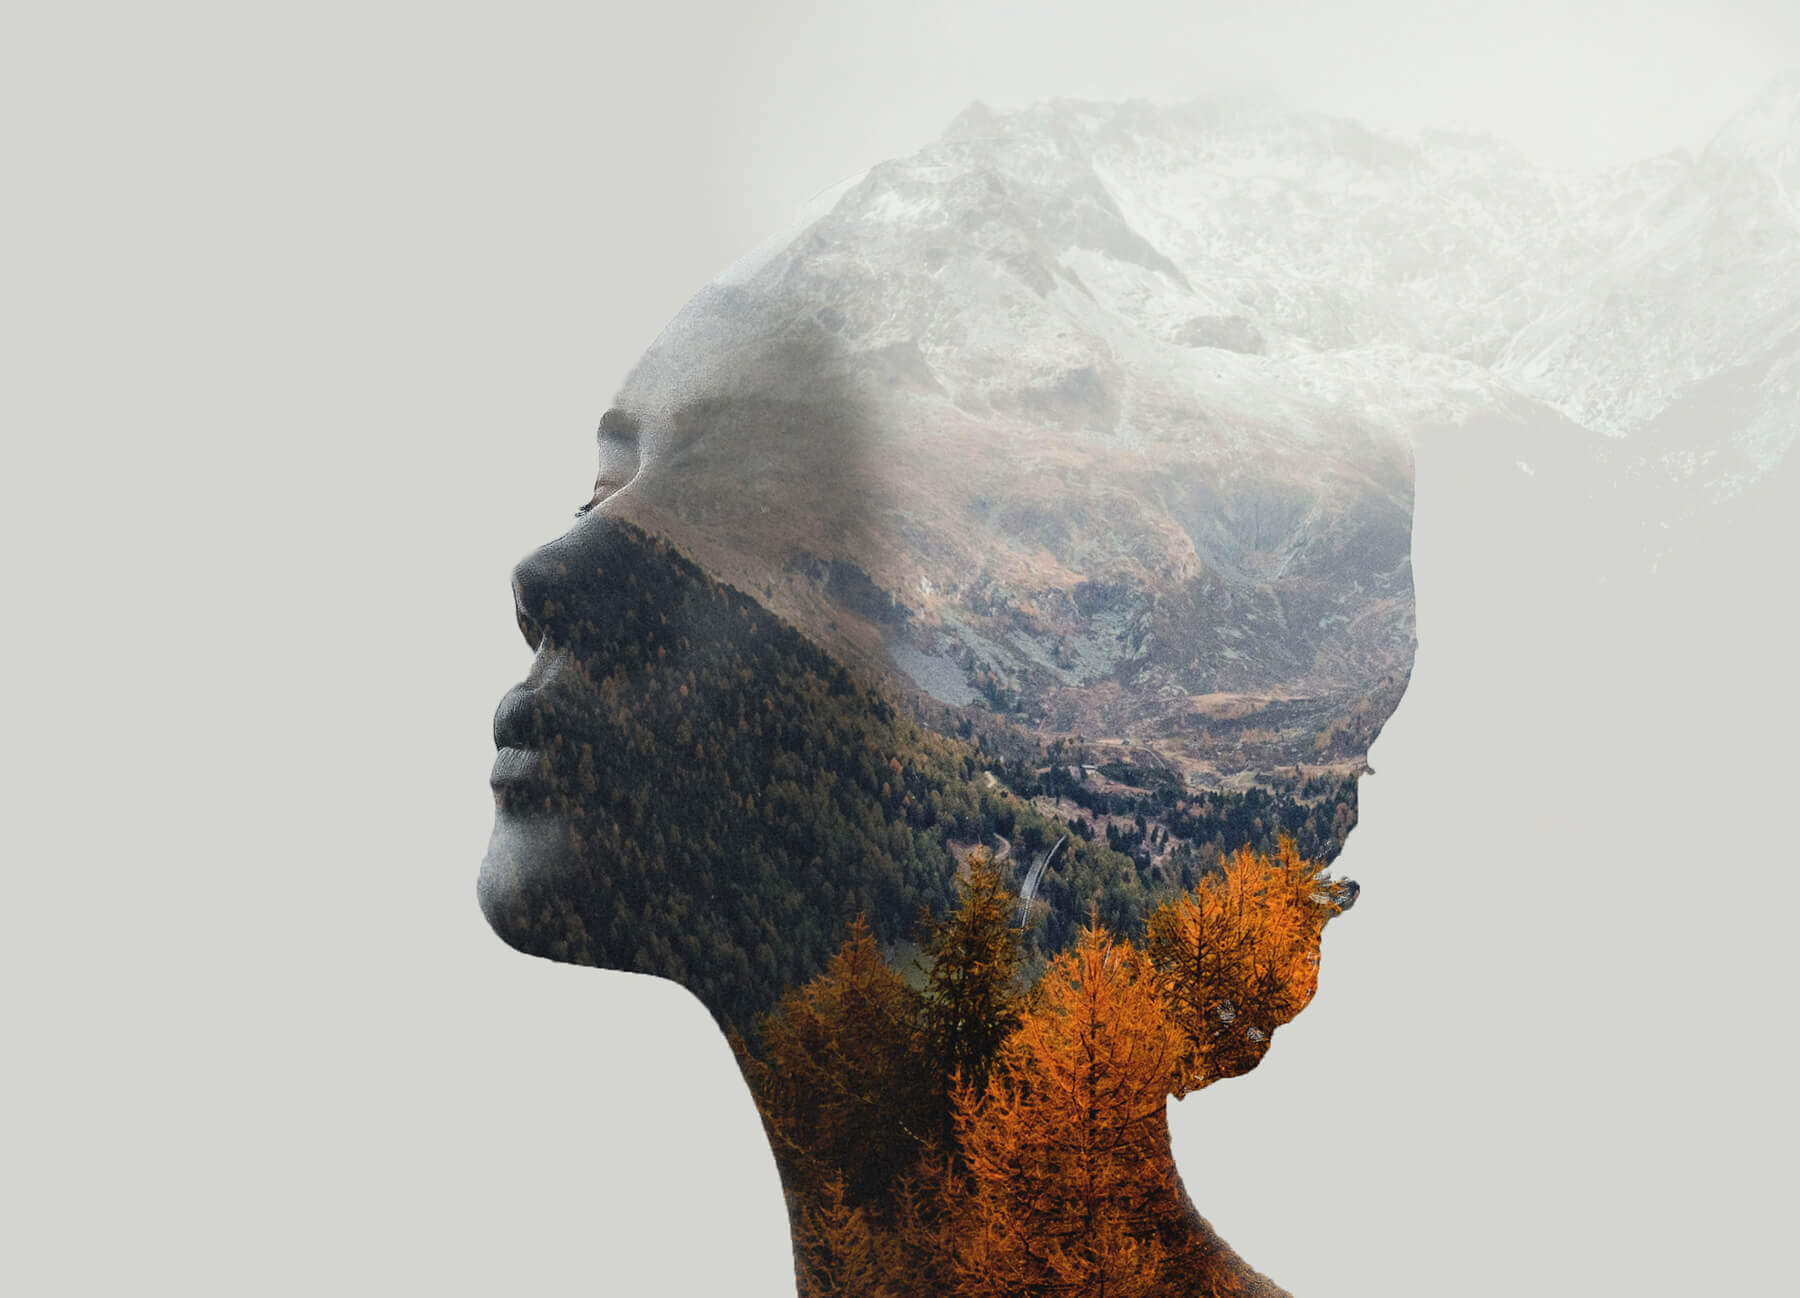 Double exposure using Photoshop layers and masks